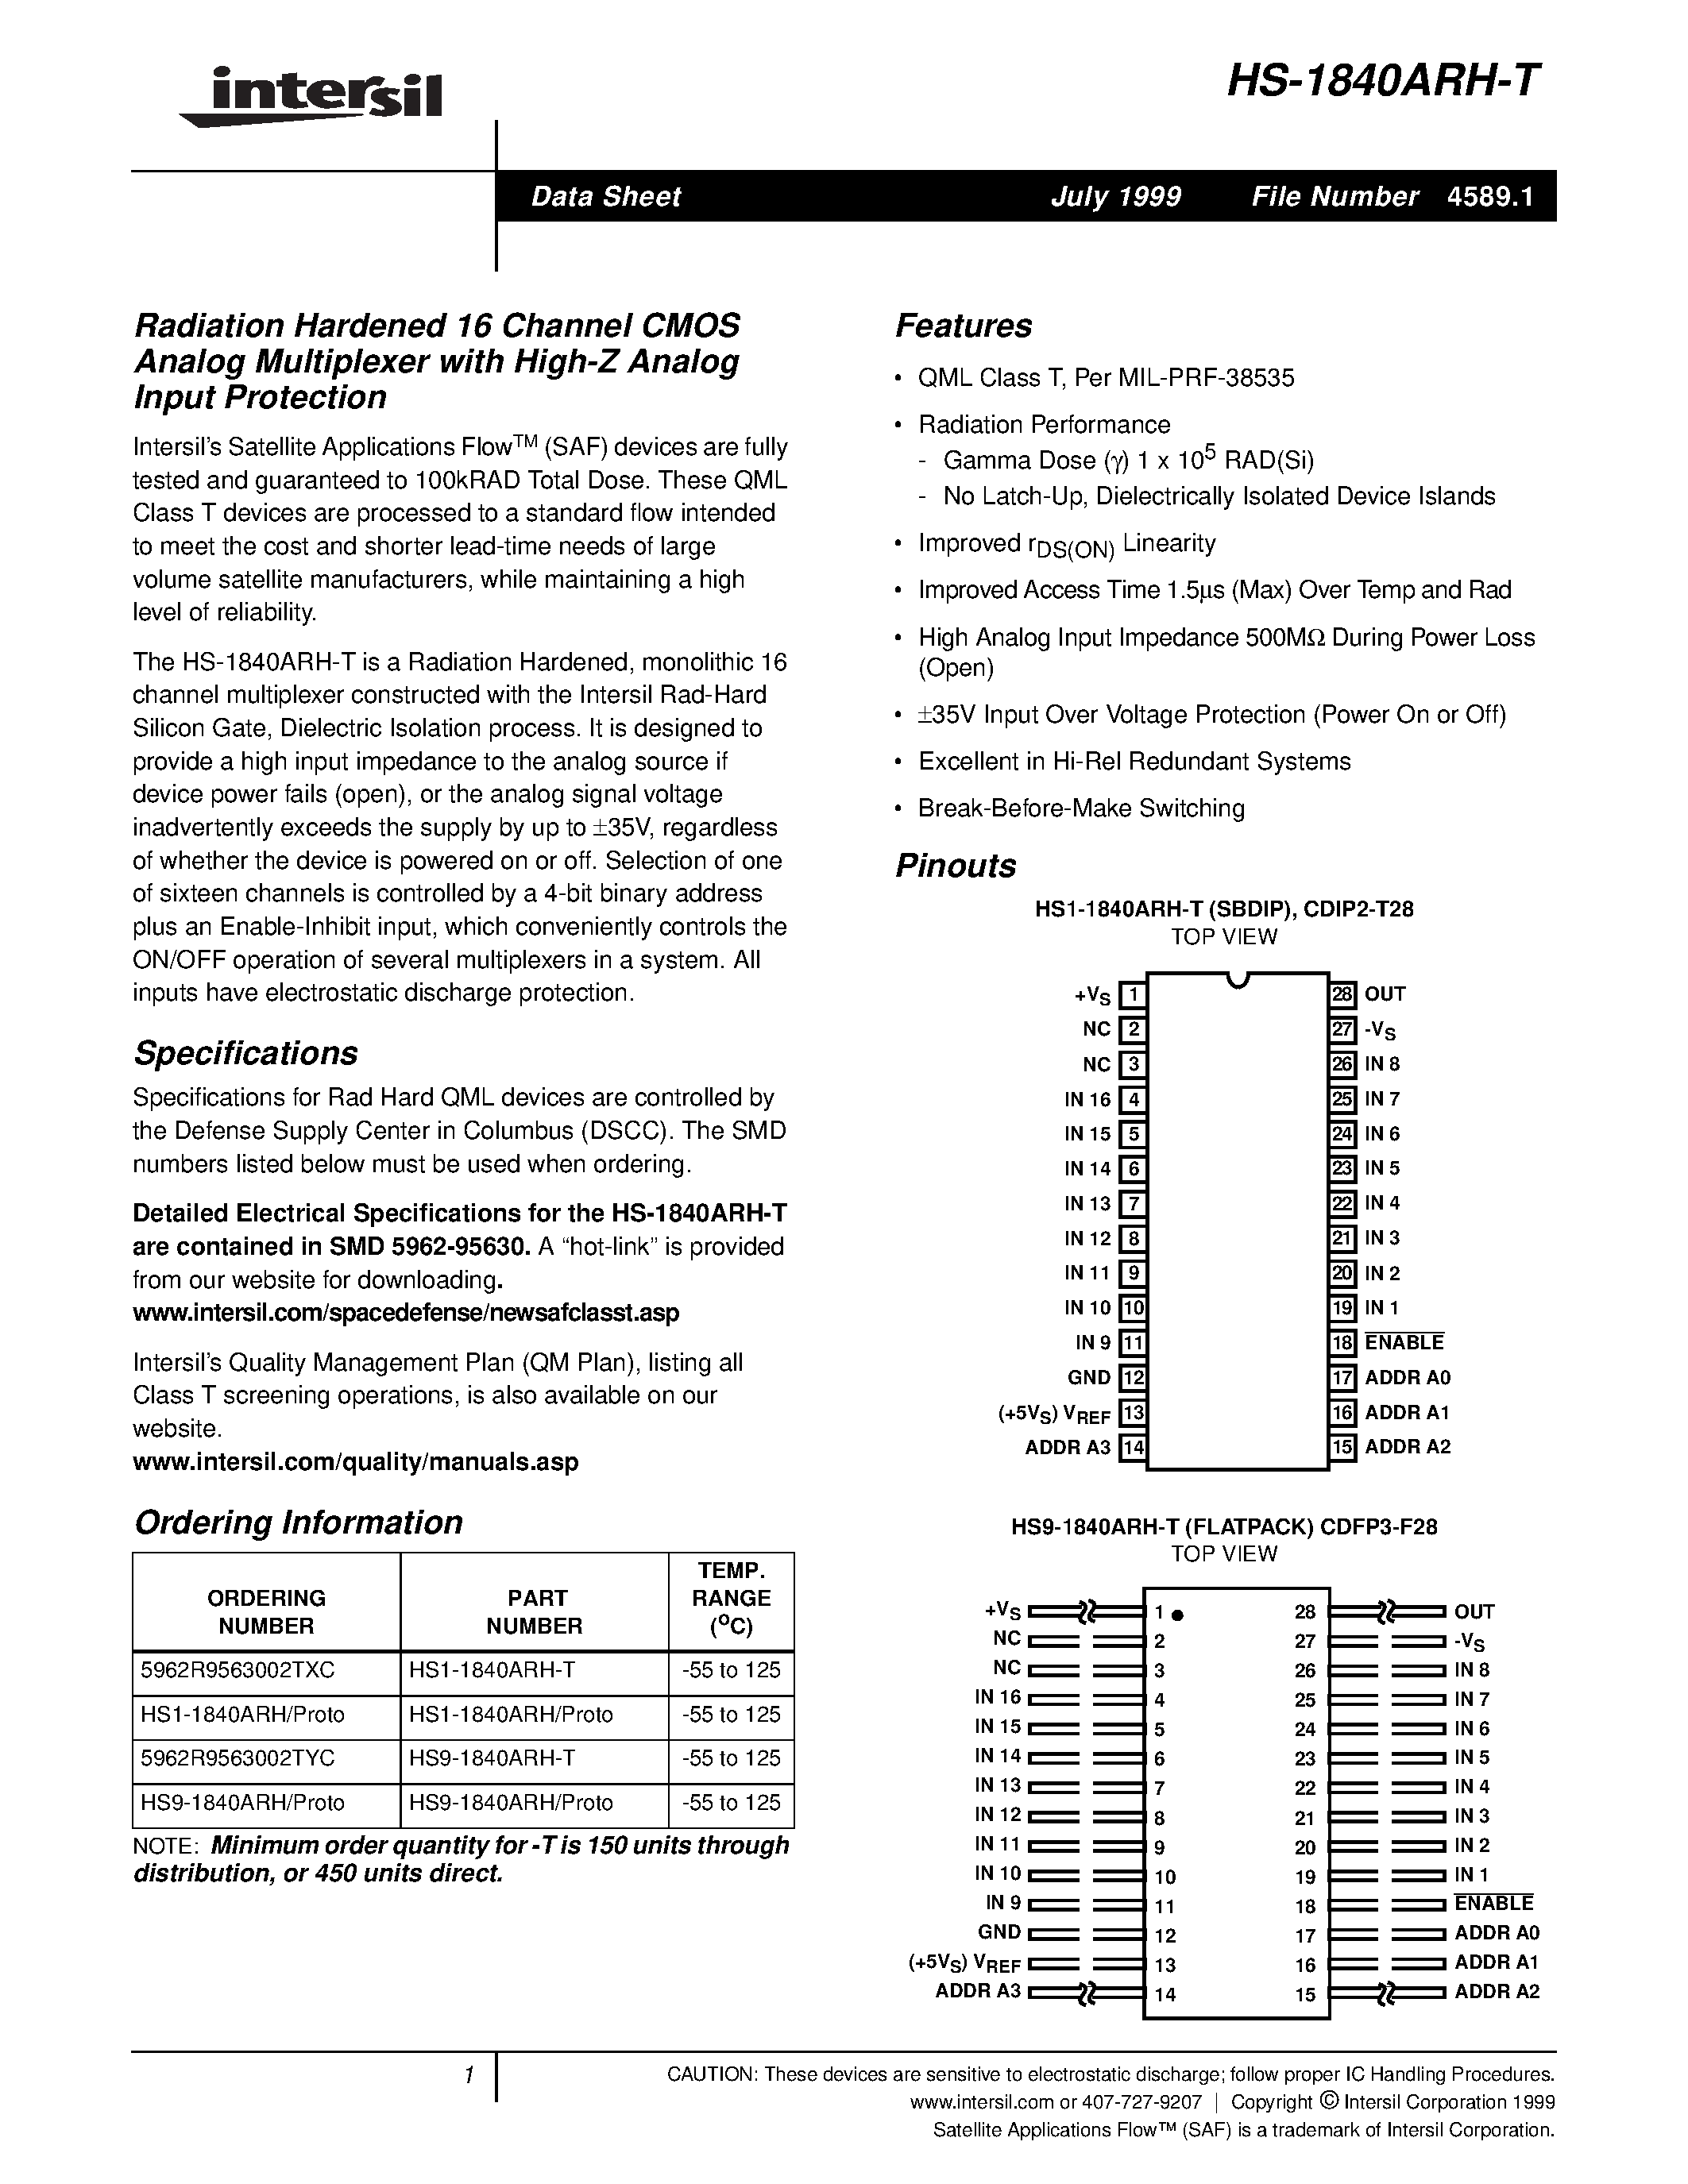 Datasheet HS9-1840ARH-T - Radiation Hardened 16 Channel CMOS Analog Multiplexer with High-Z Analog Input Protection page 1